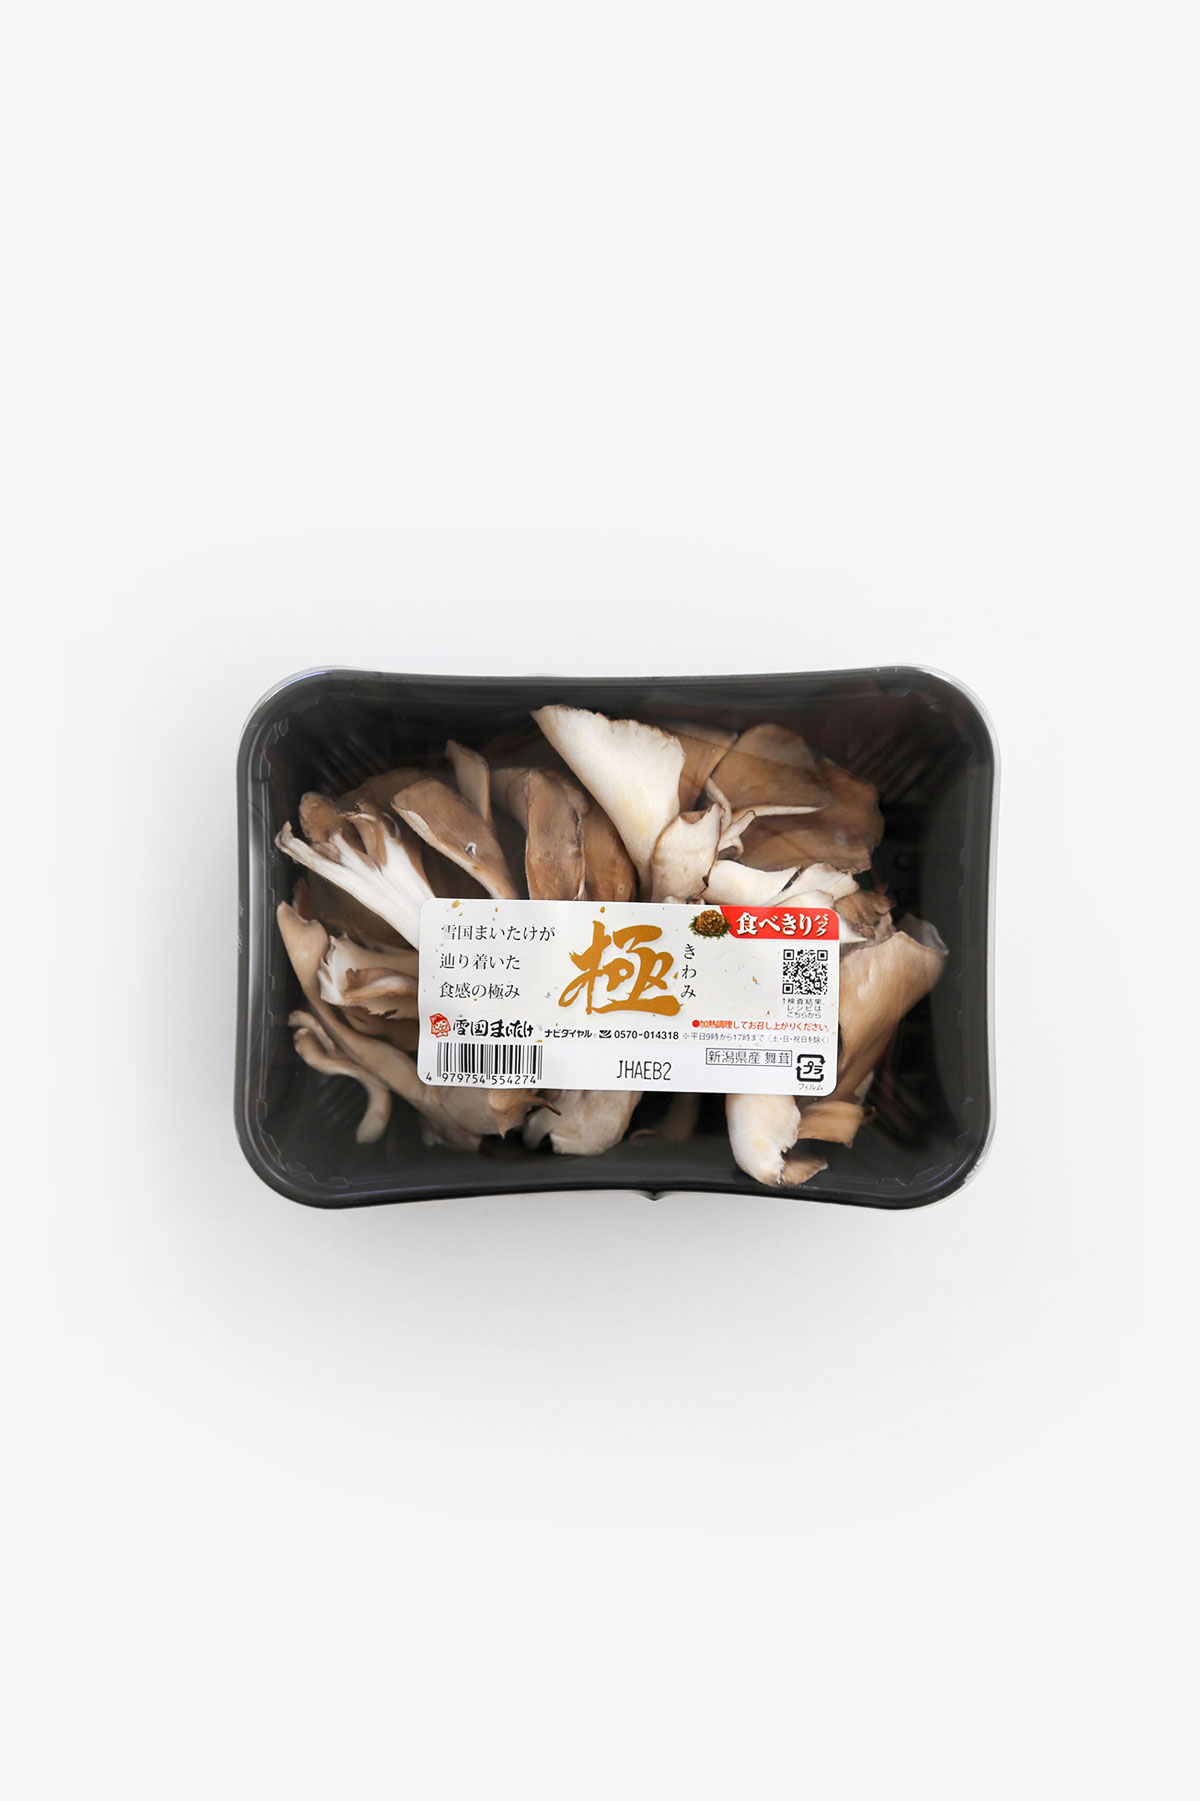 Japanese mushrooms and keto or low carb.